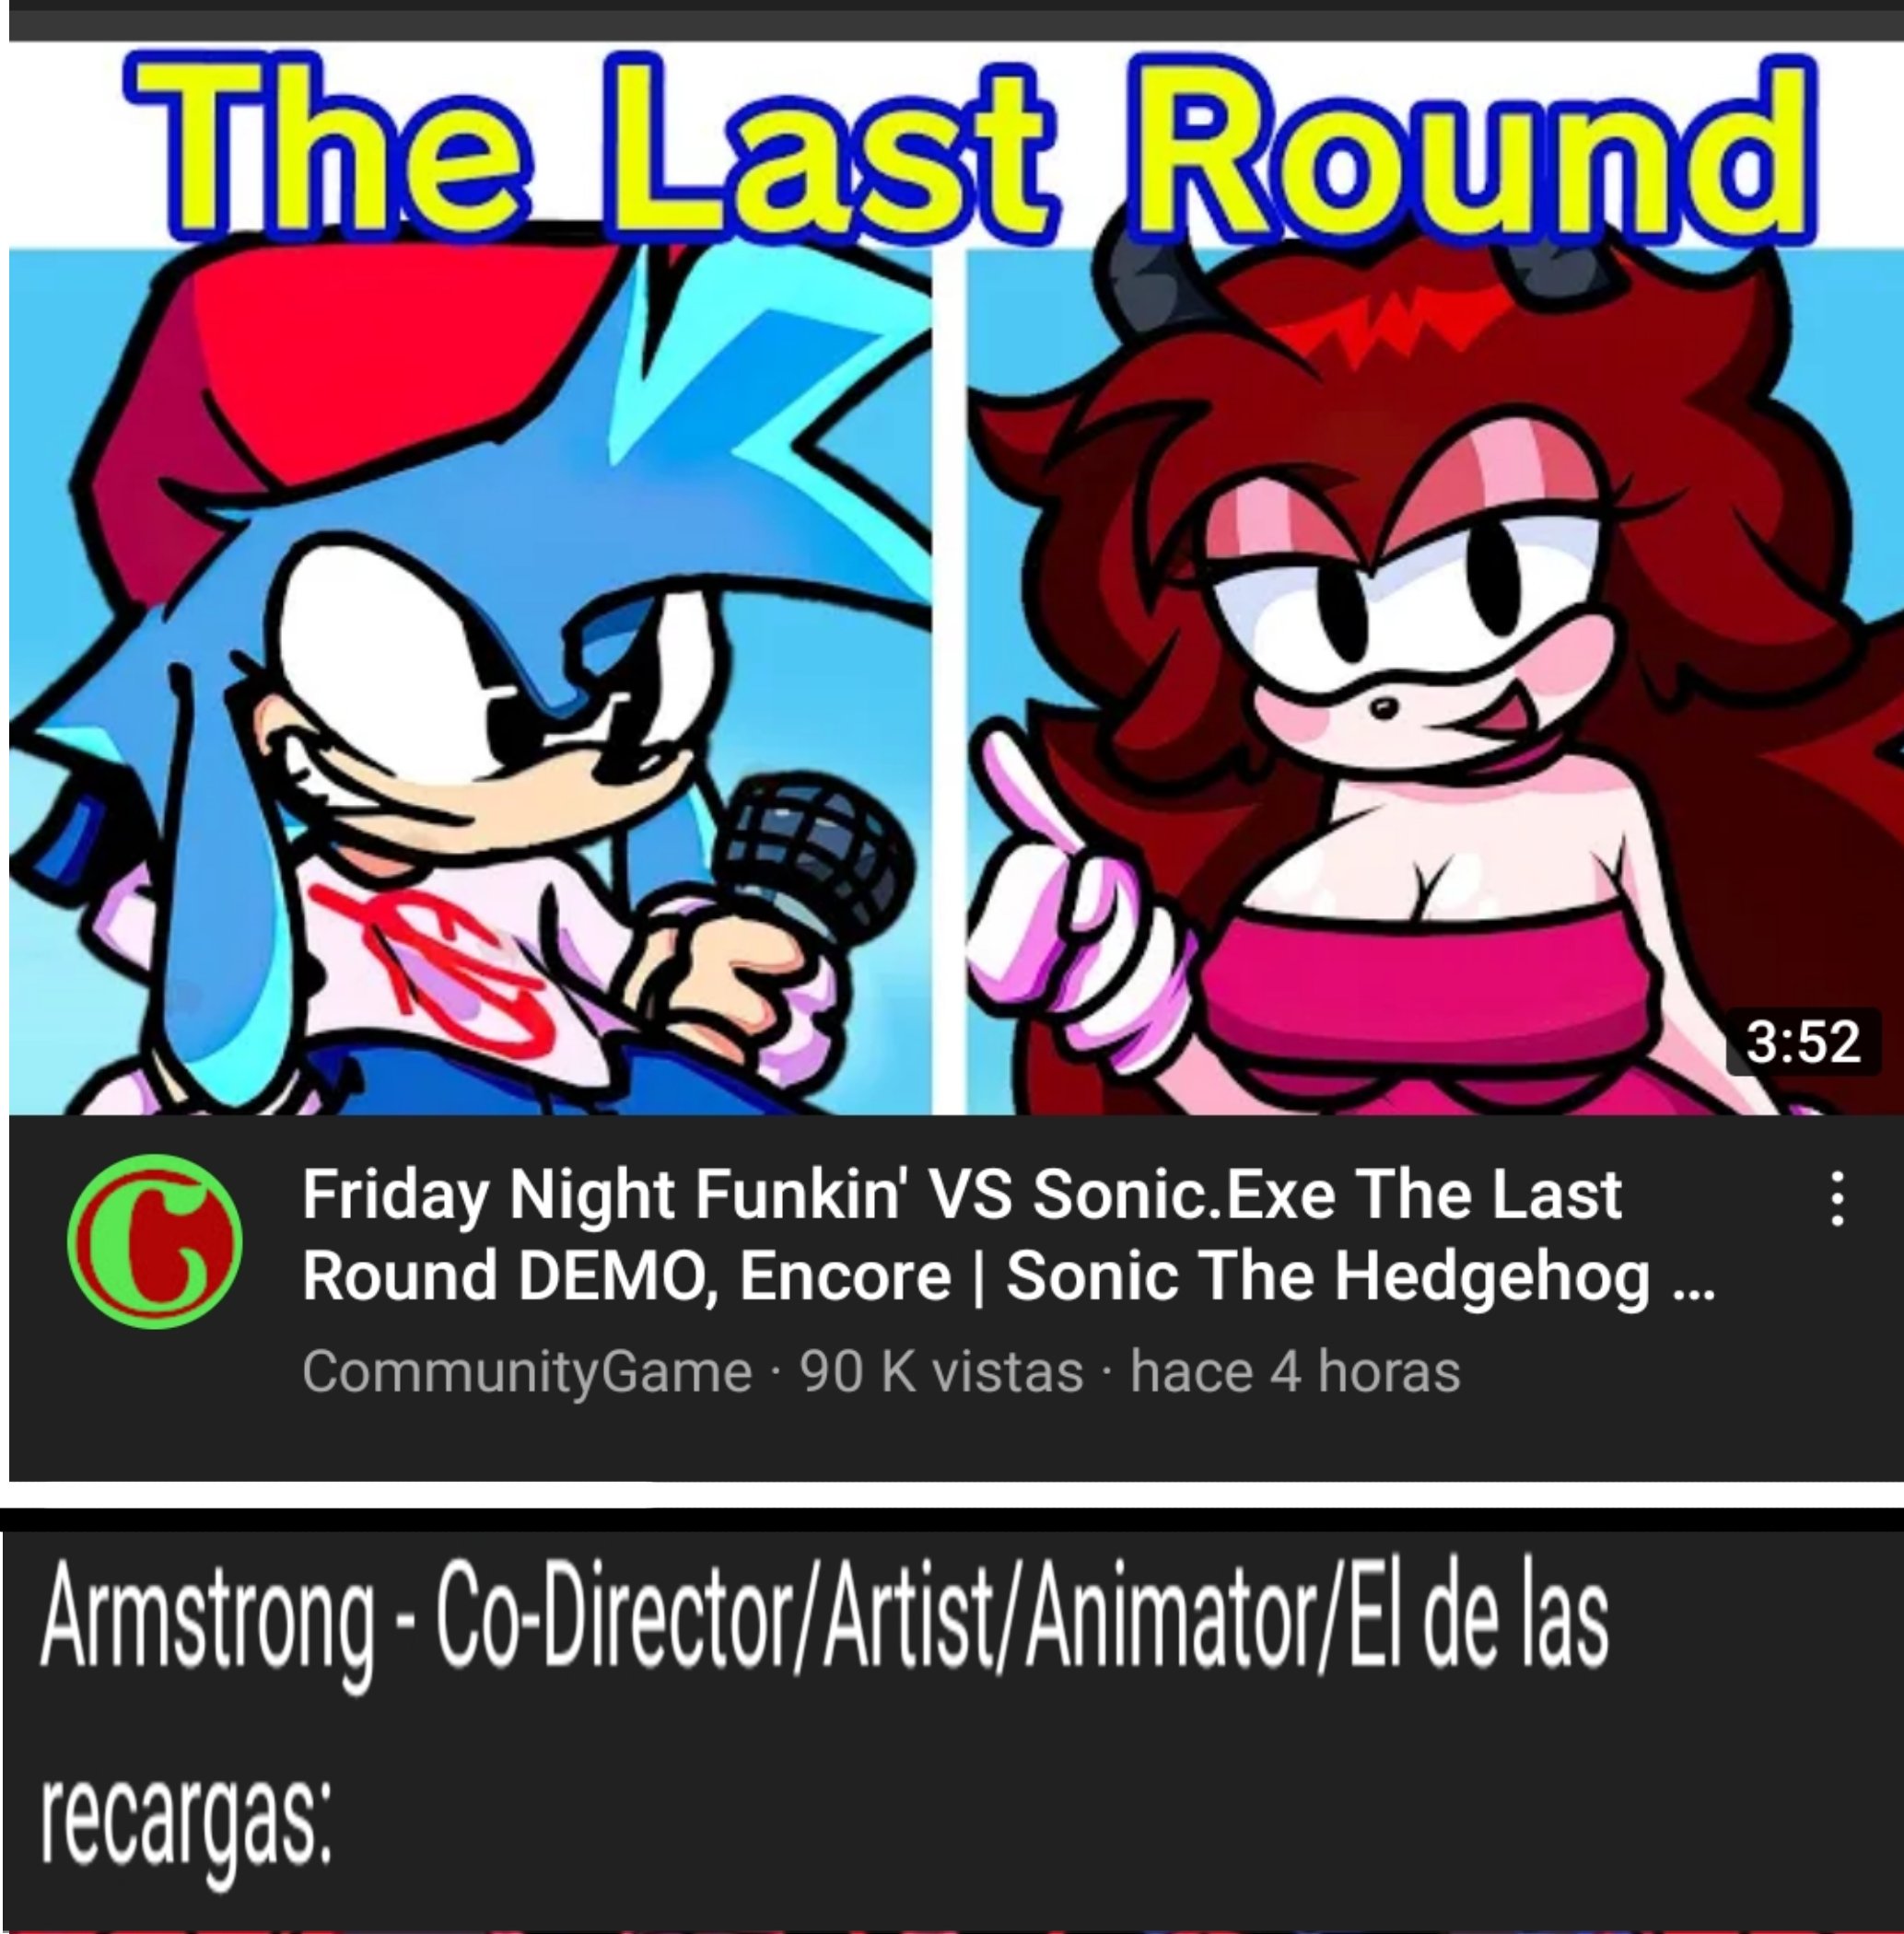 SONIC.EXE ONE LAST ROUND REWORKED [DEMO] 